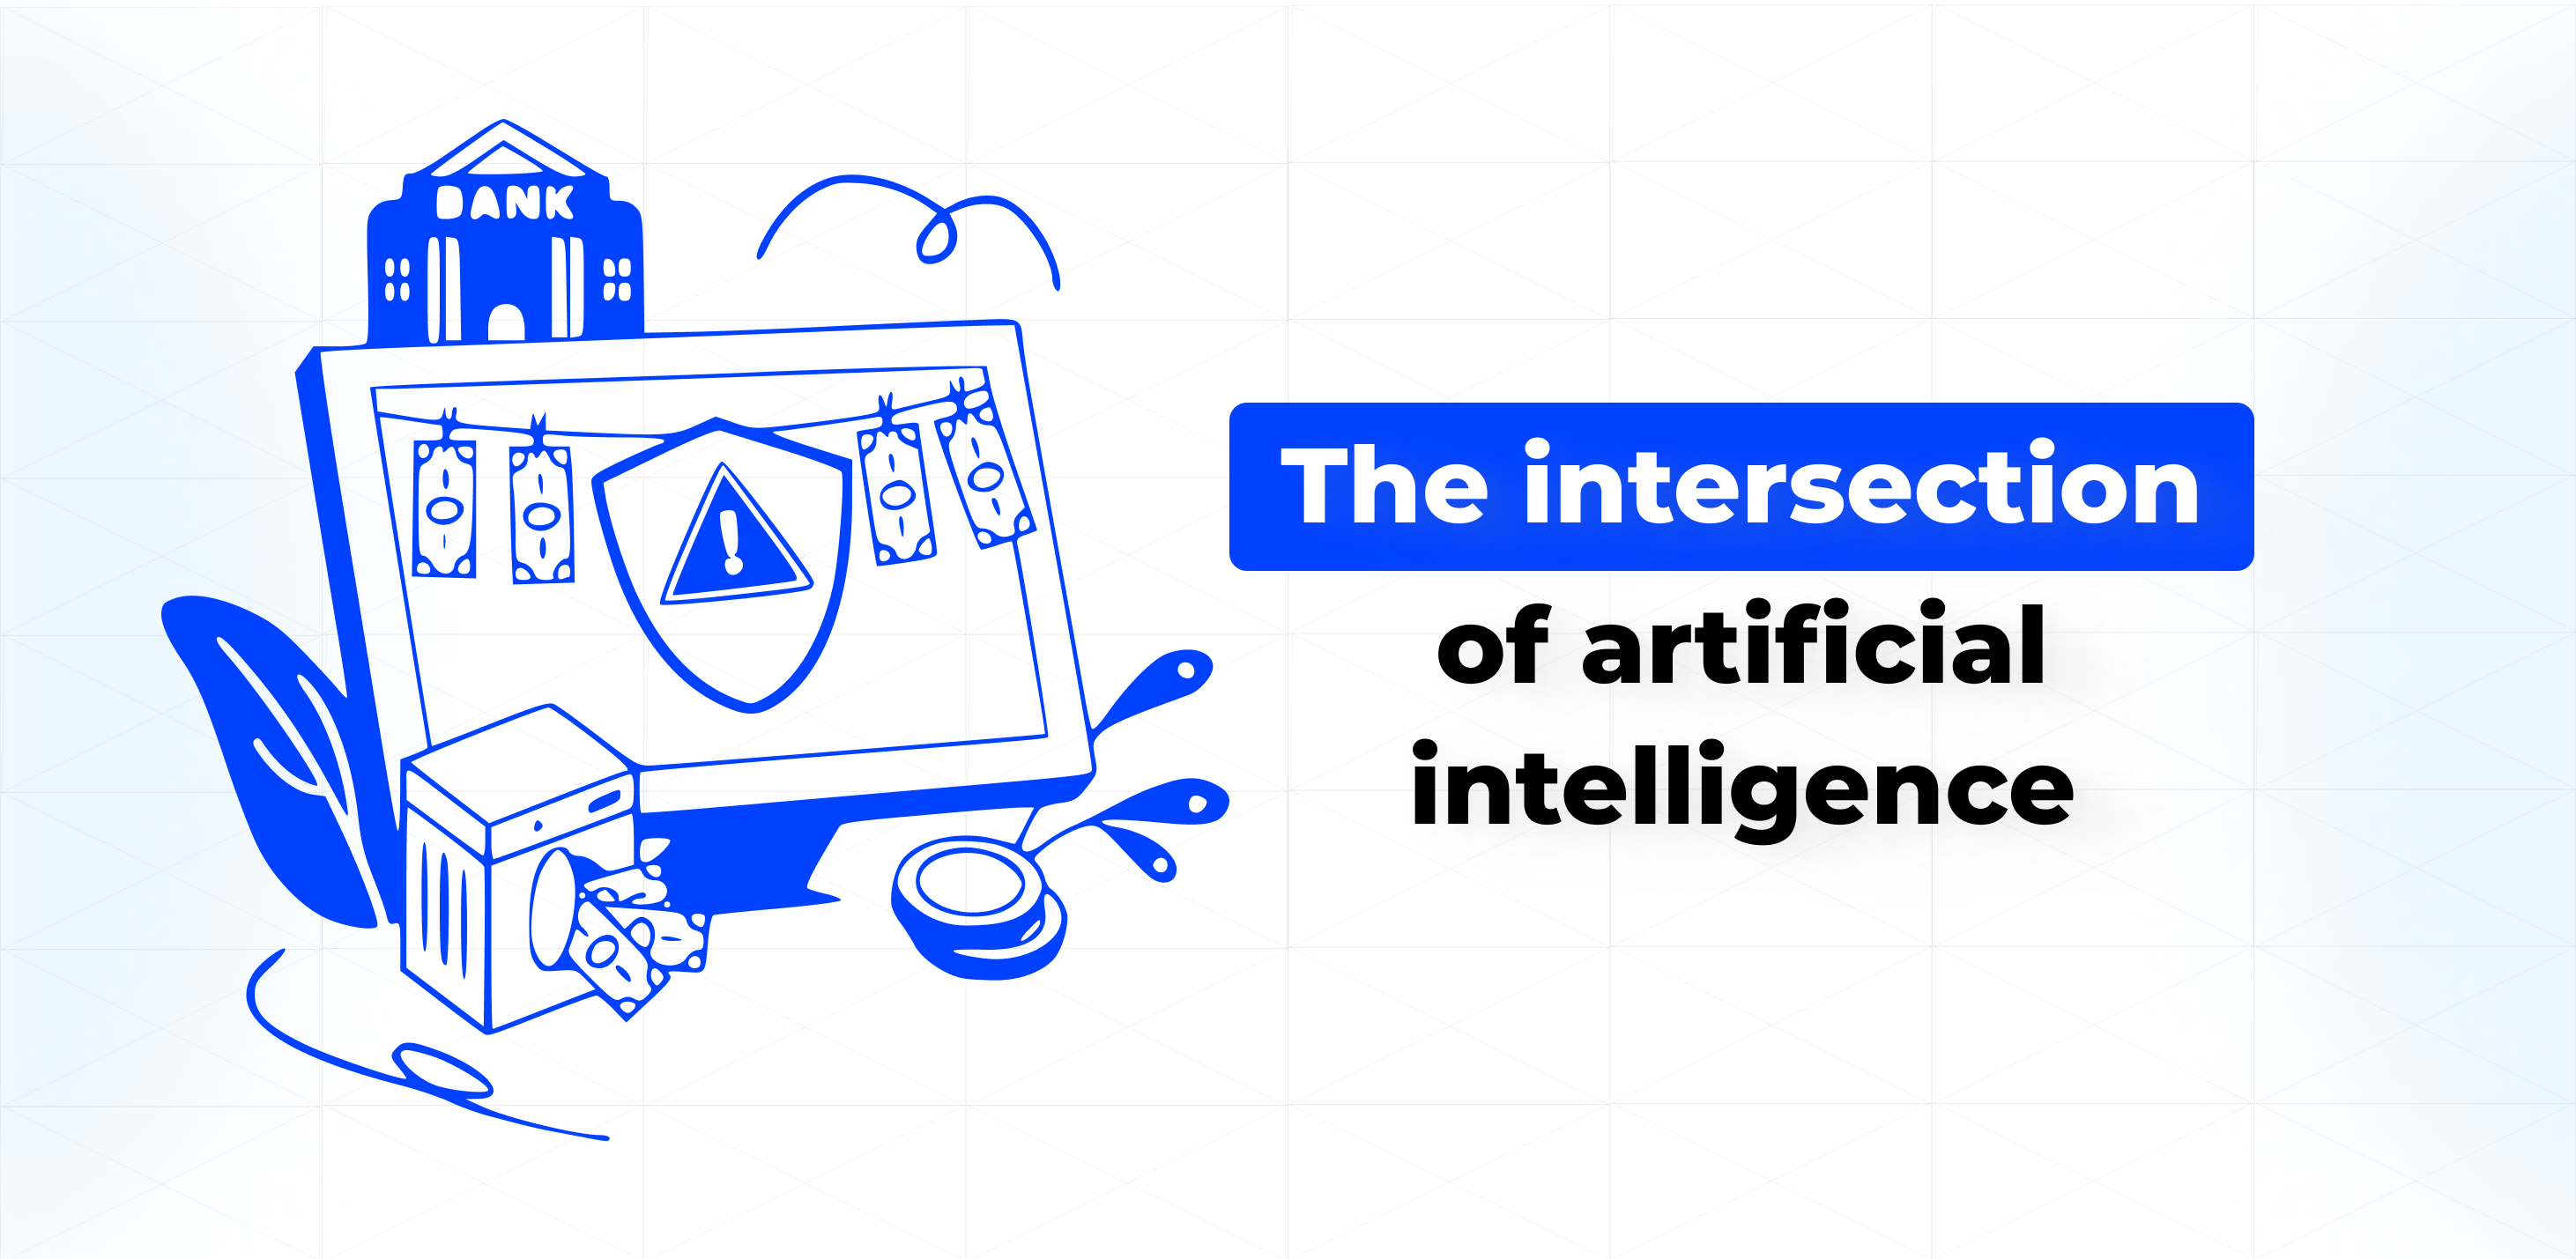 The intersection of artificial intelligence and fraud detection in digital payments